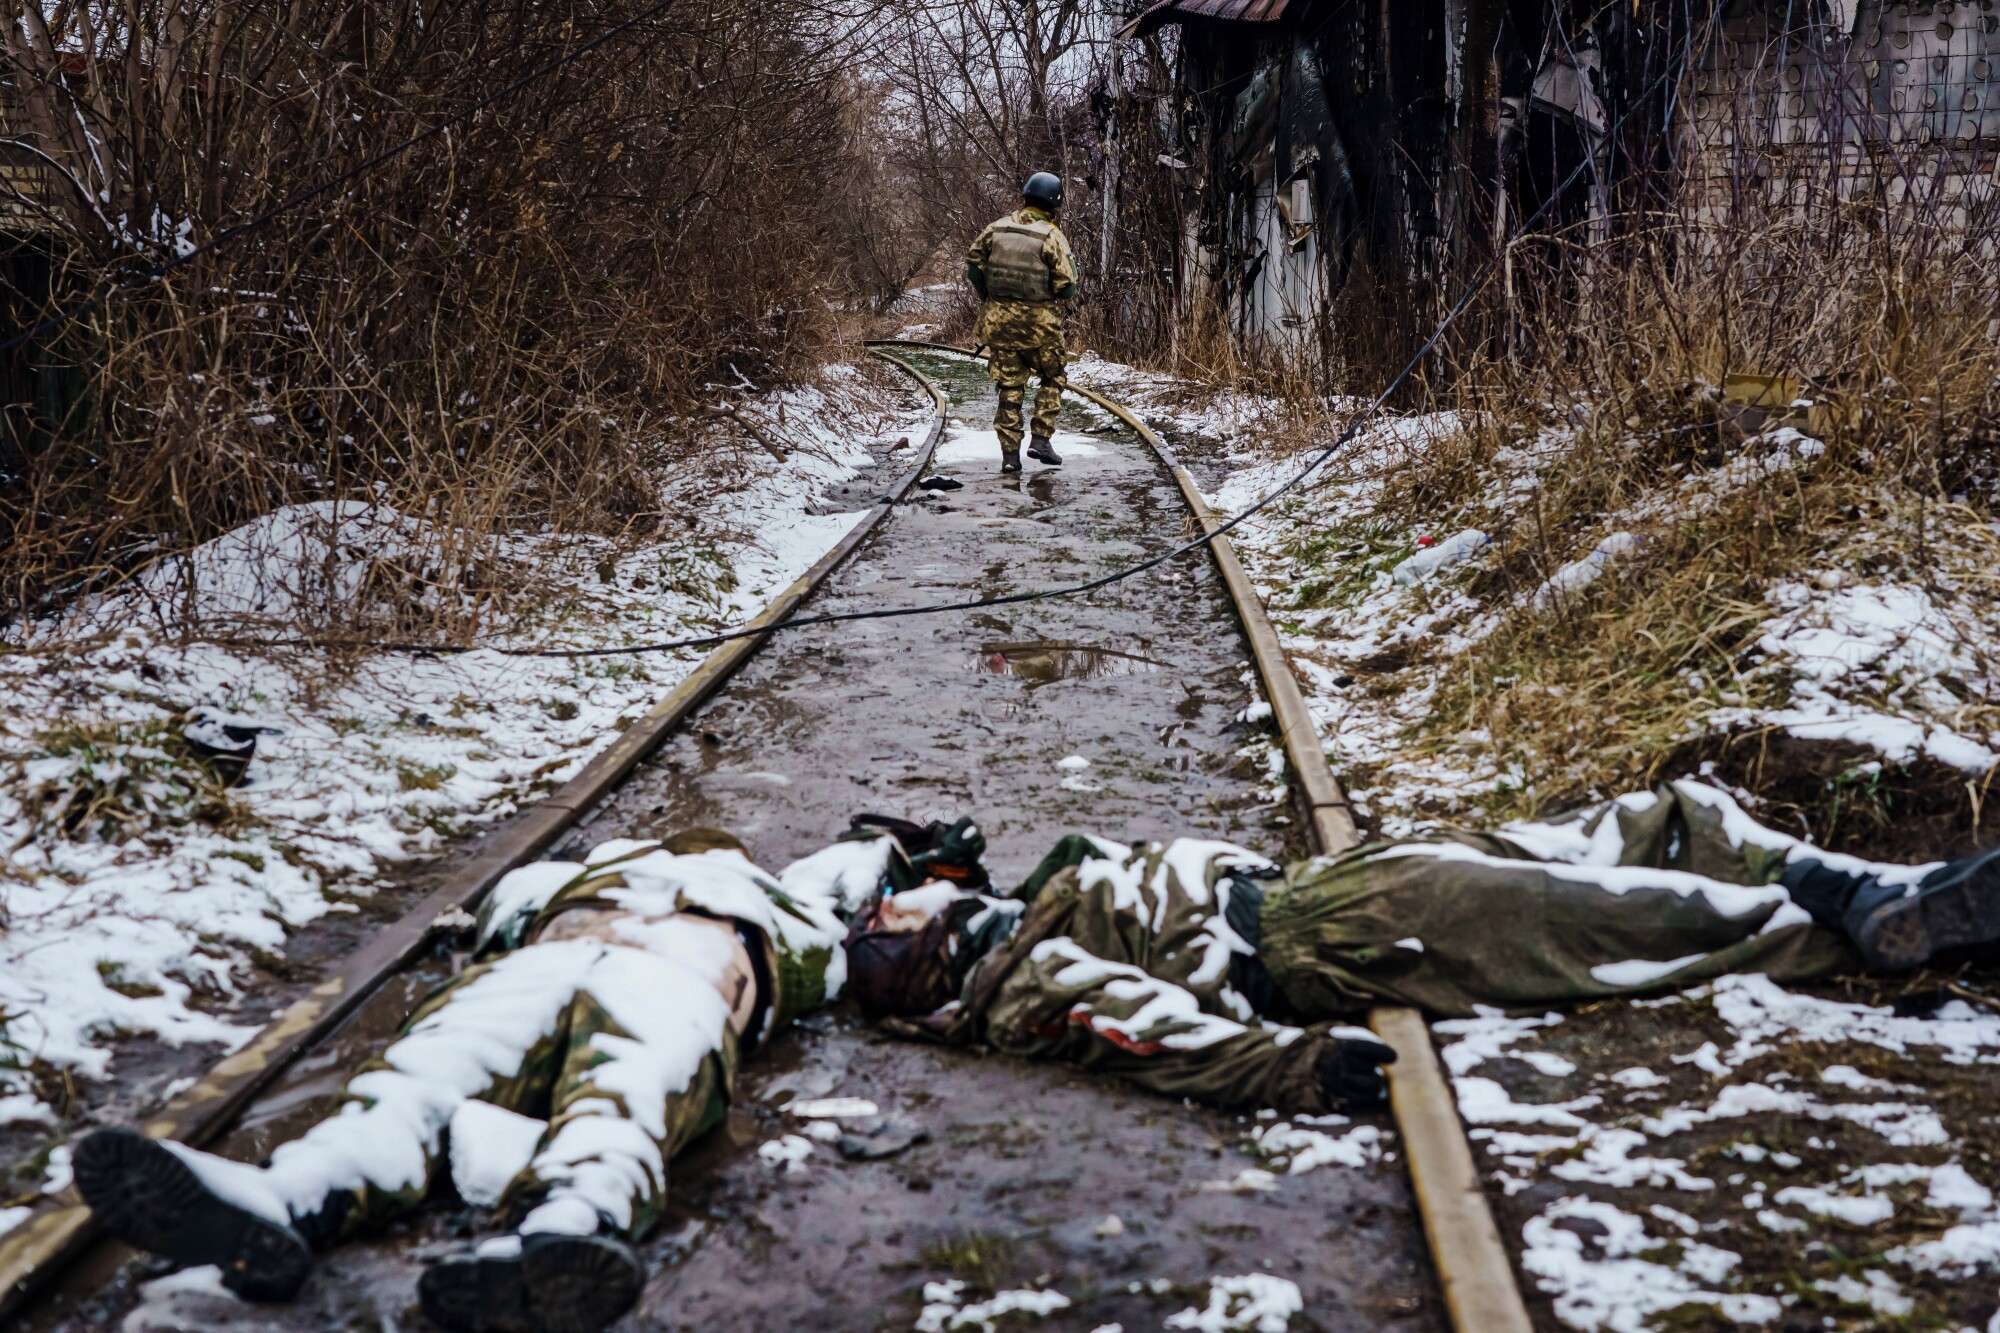 A Ukrainian soldier wanders down the railway to inspect something, past the bodies of dead Russian soldiers